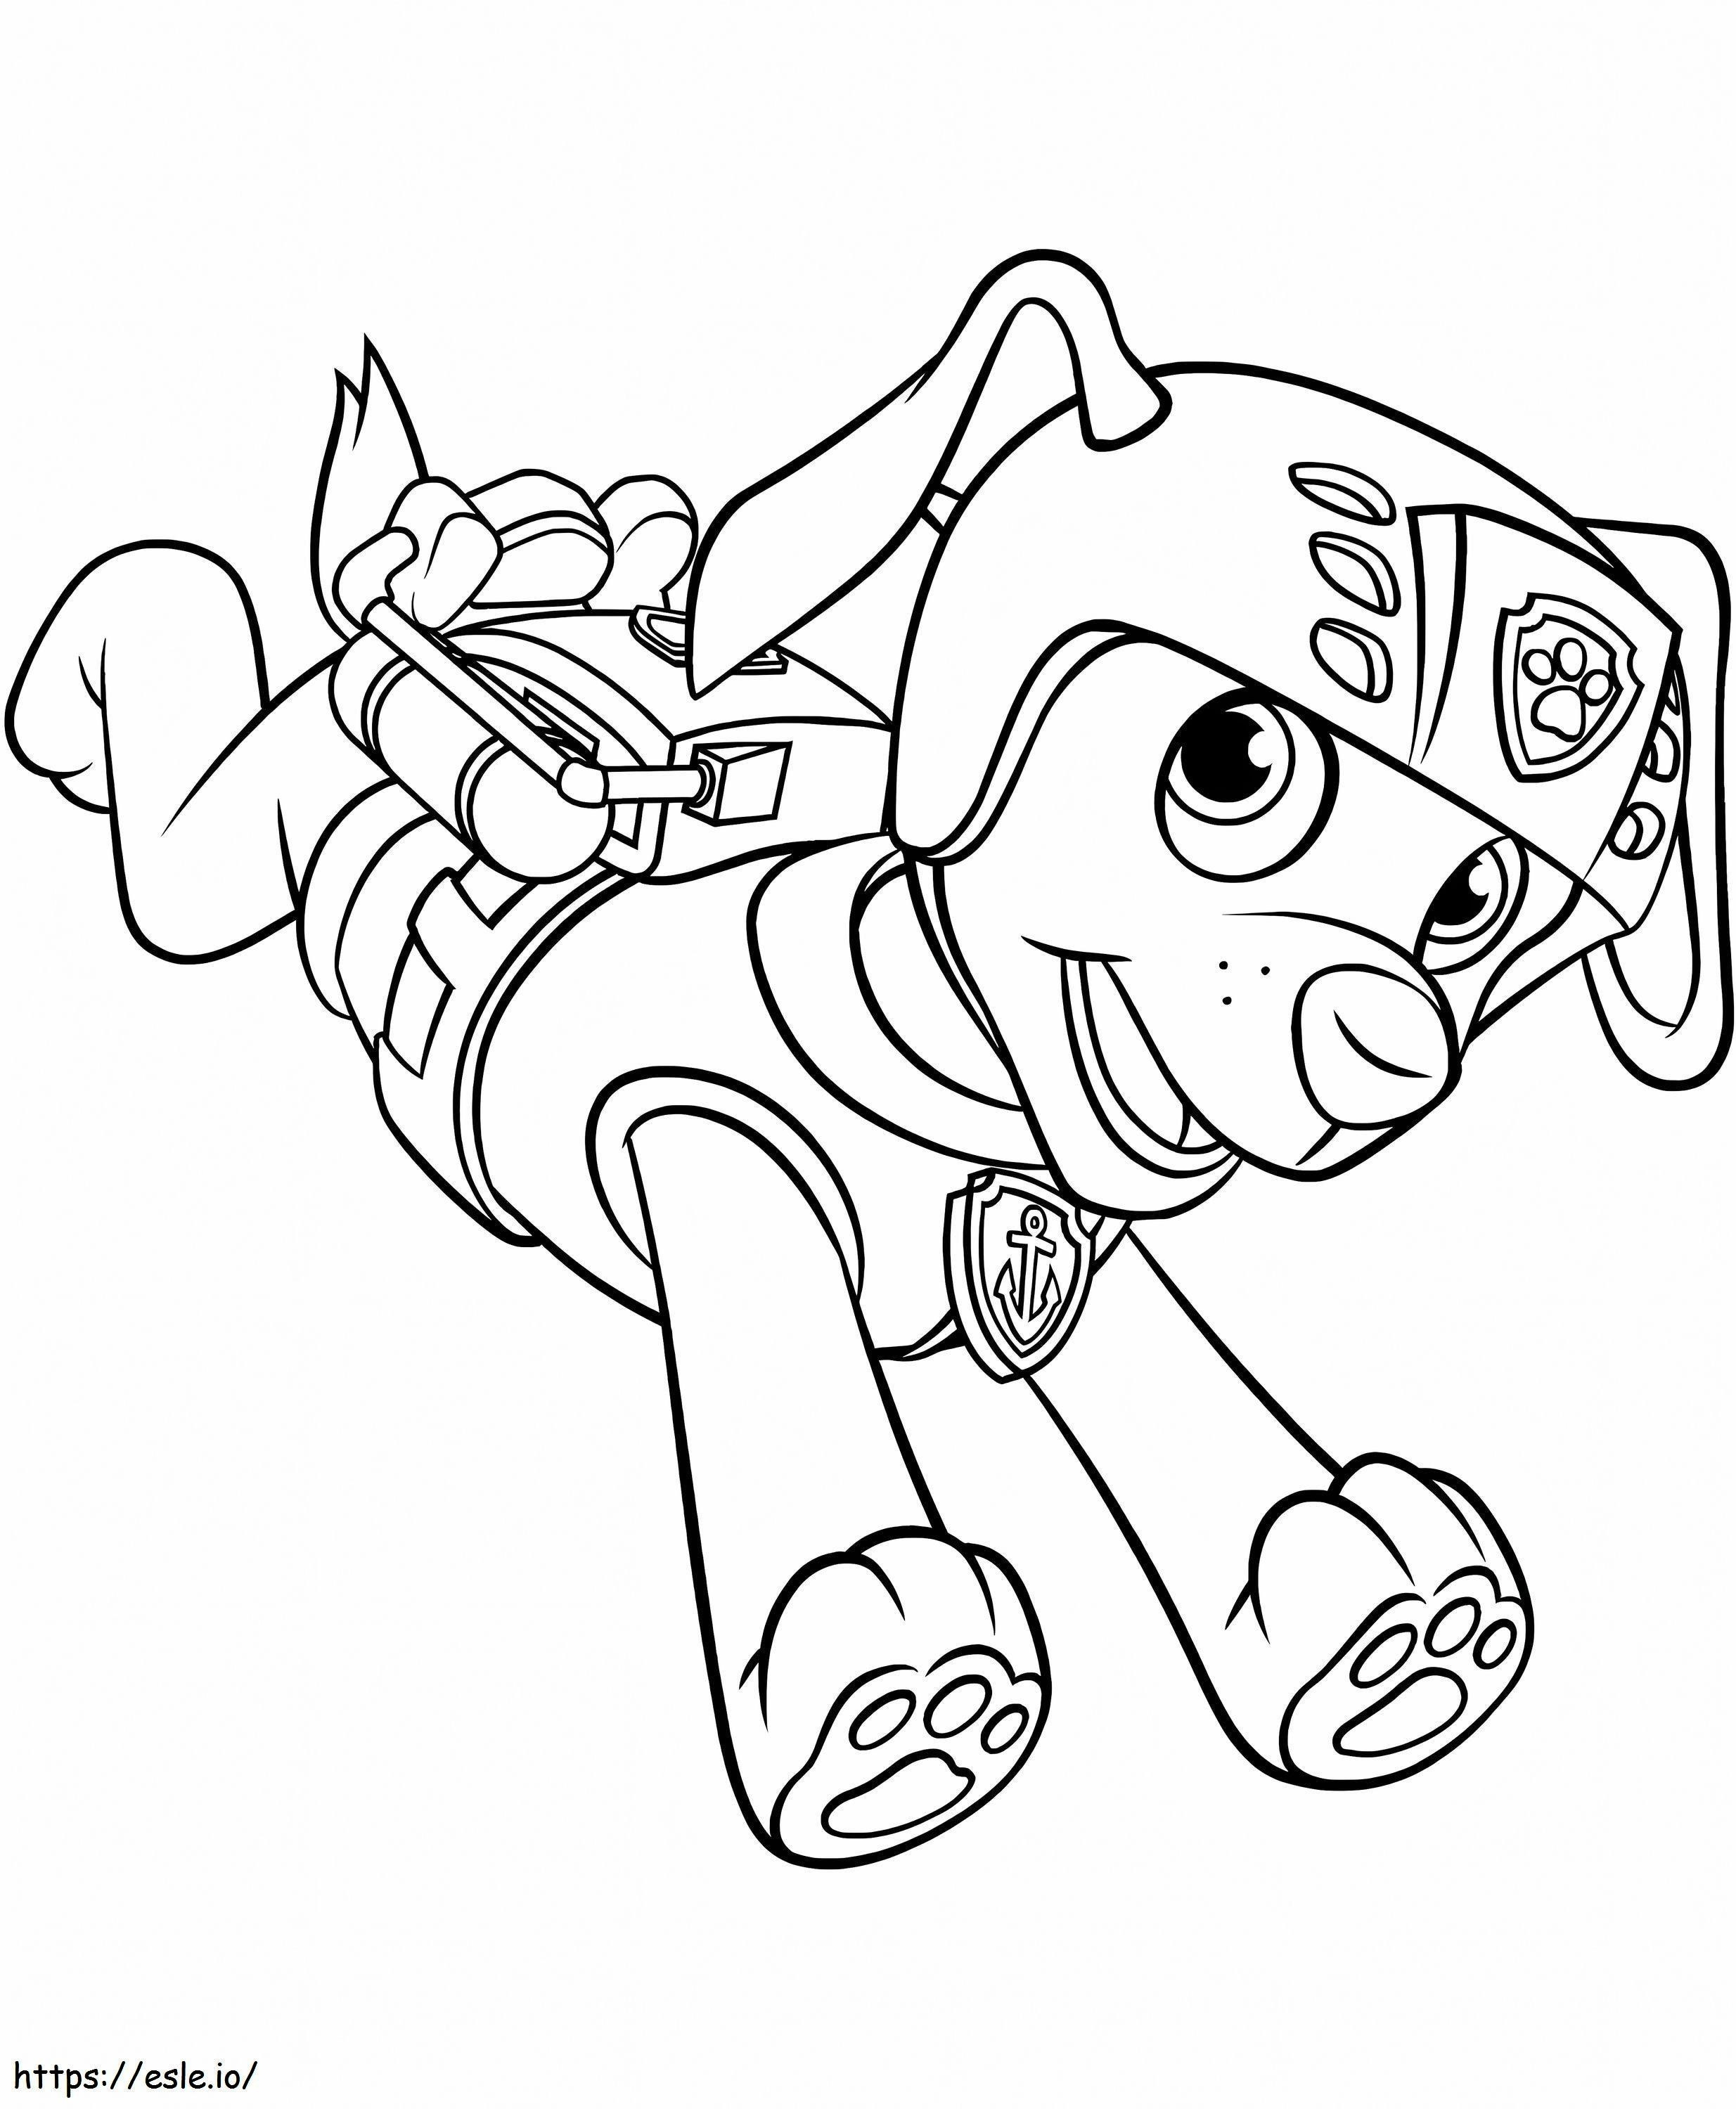 1565658991 Zuma Running A4 coloring page